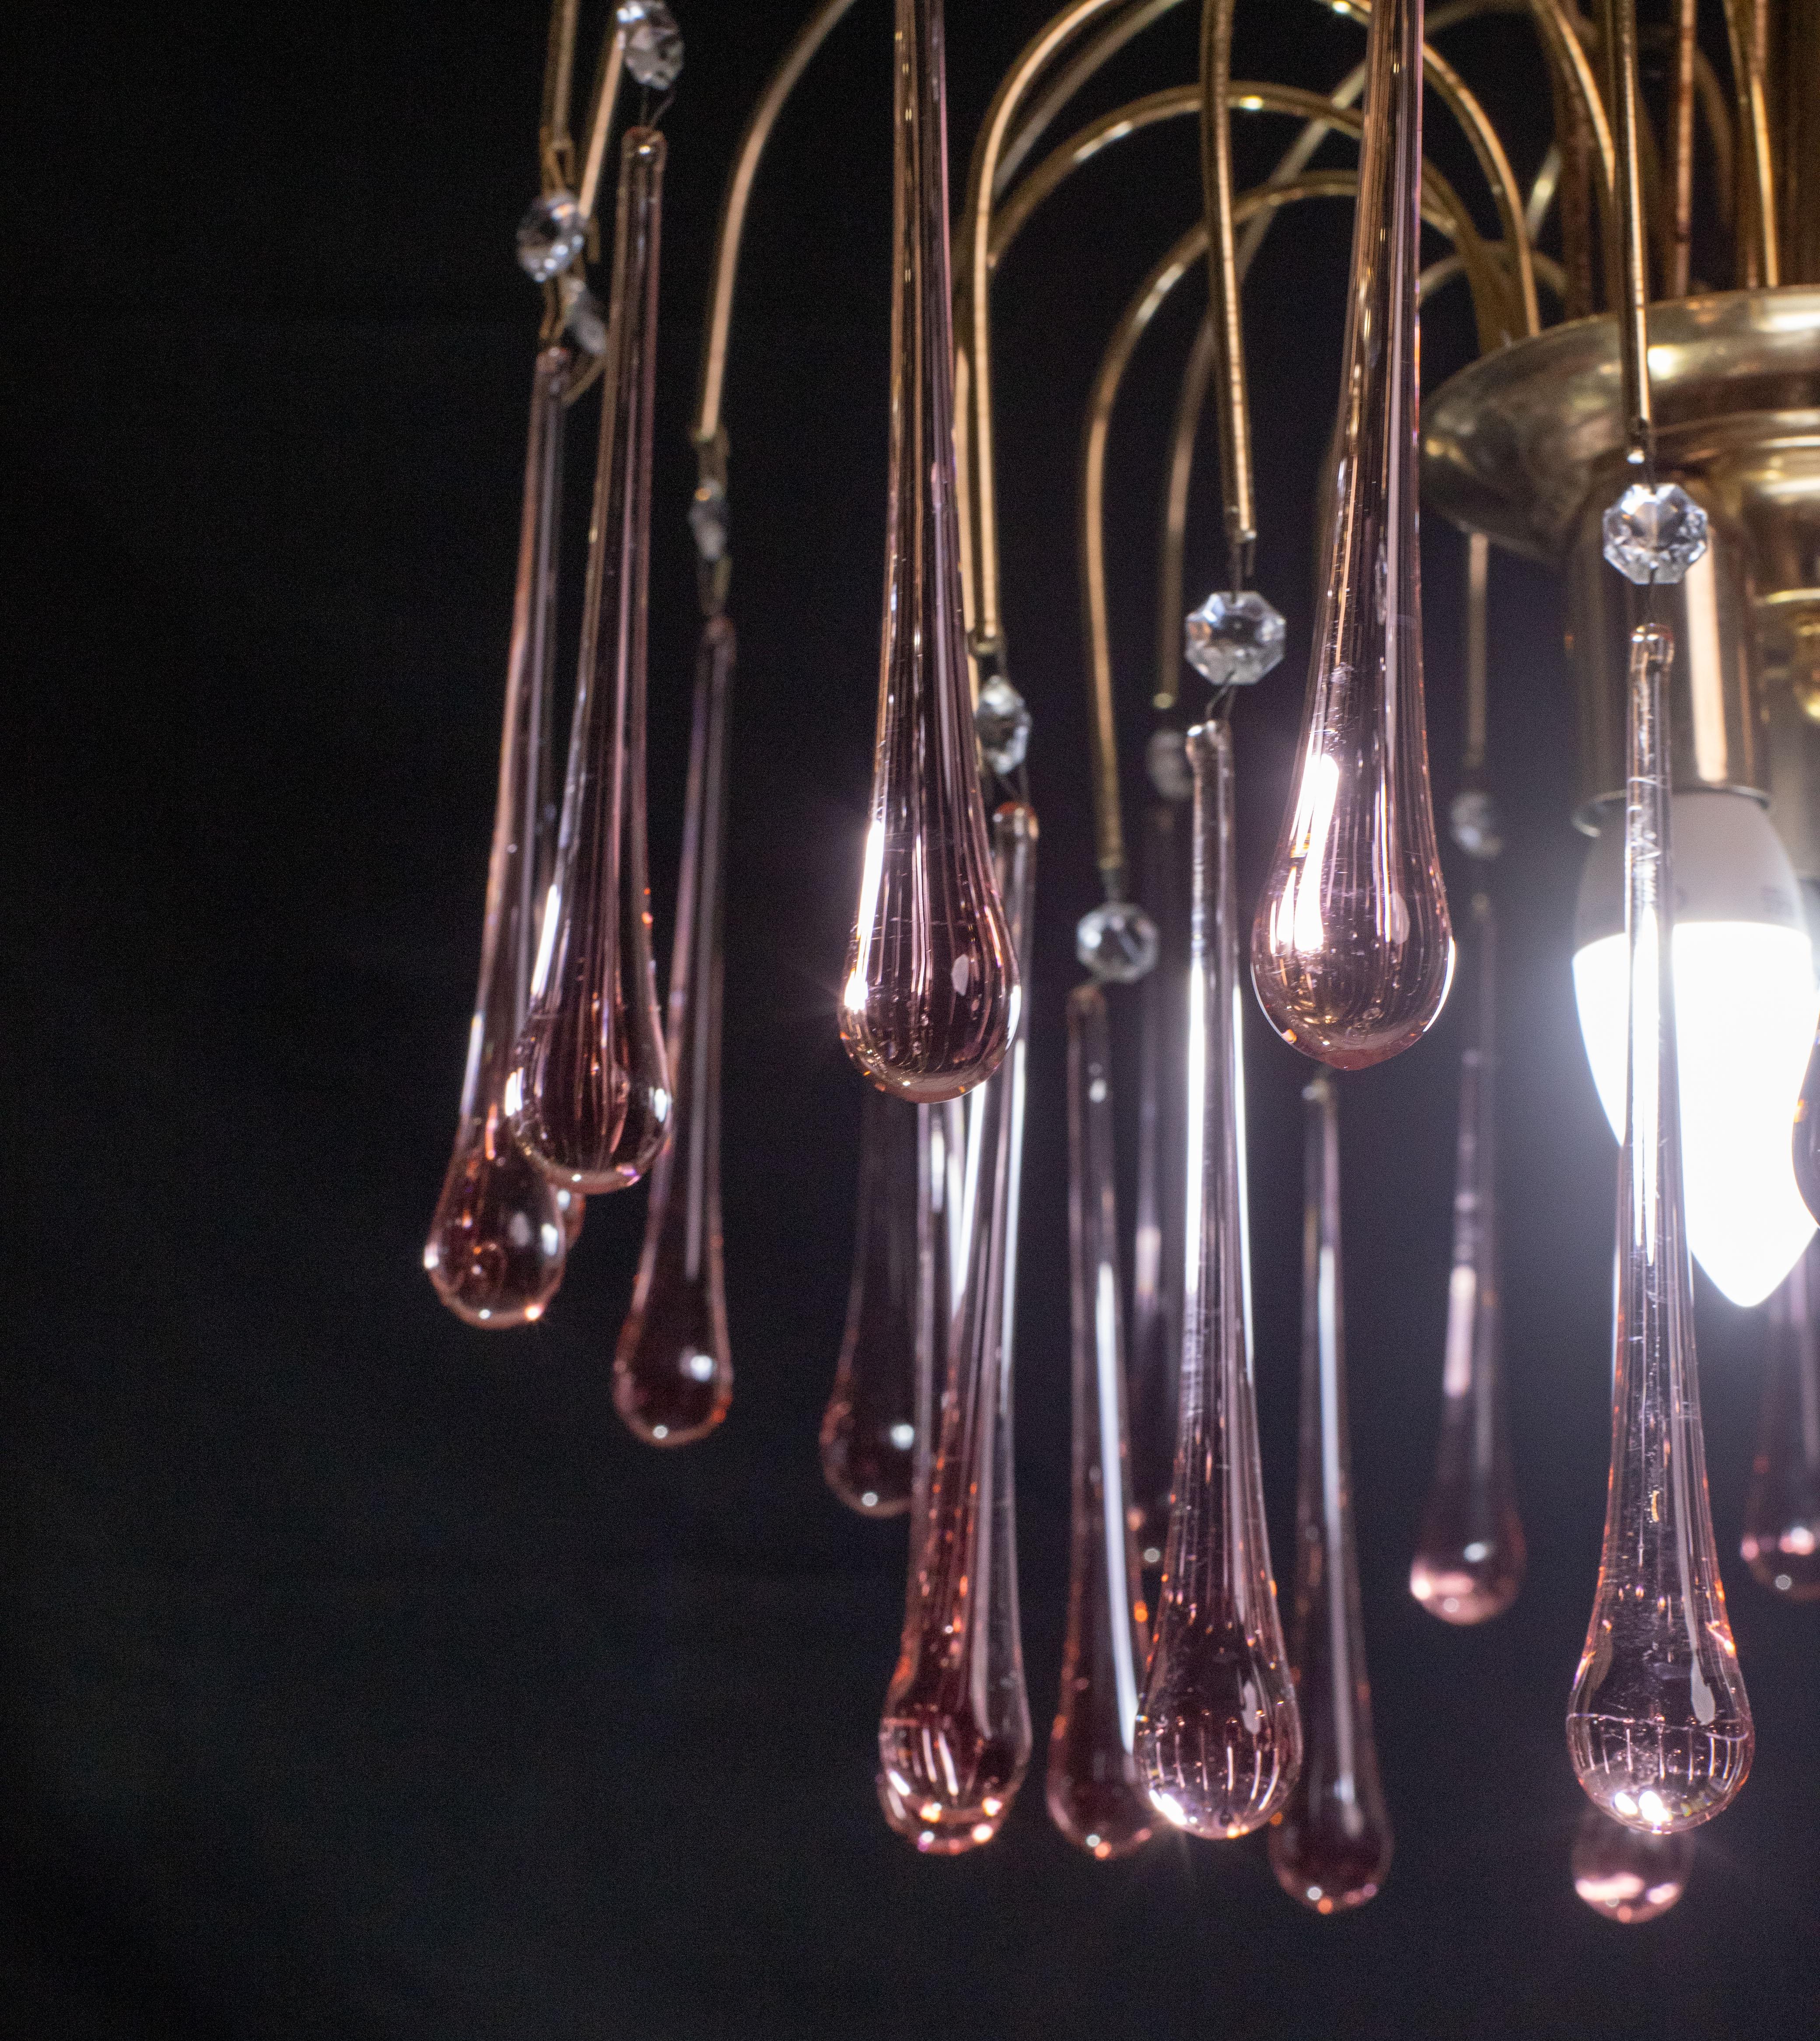 Gorgeous Murano chandelier in the style of Venini La Cascata.
The chandeliers consist of two rounds composed of beautiful pink drops cascading down and alternating with crystals.
The chandelier consists of 3 e14 light points, the frame is in gold